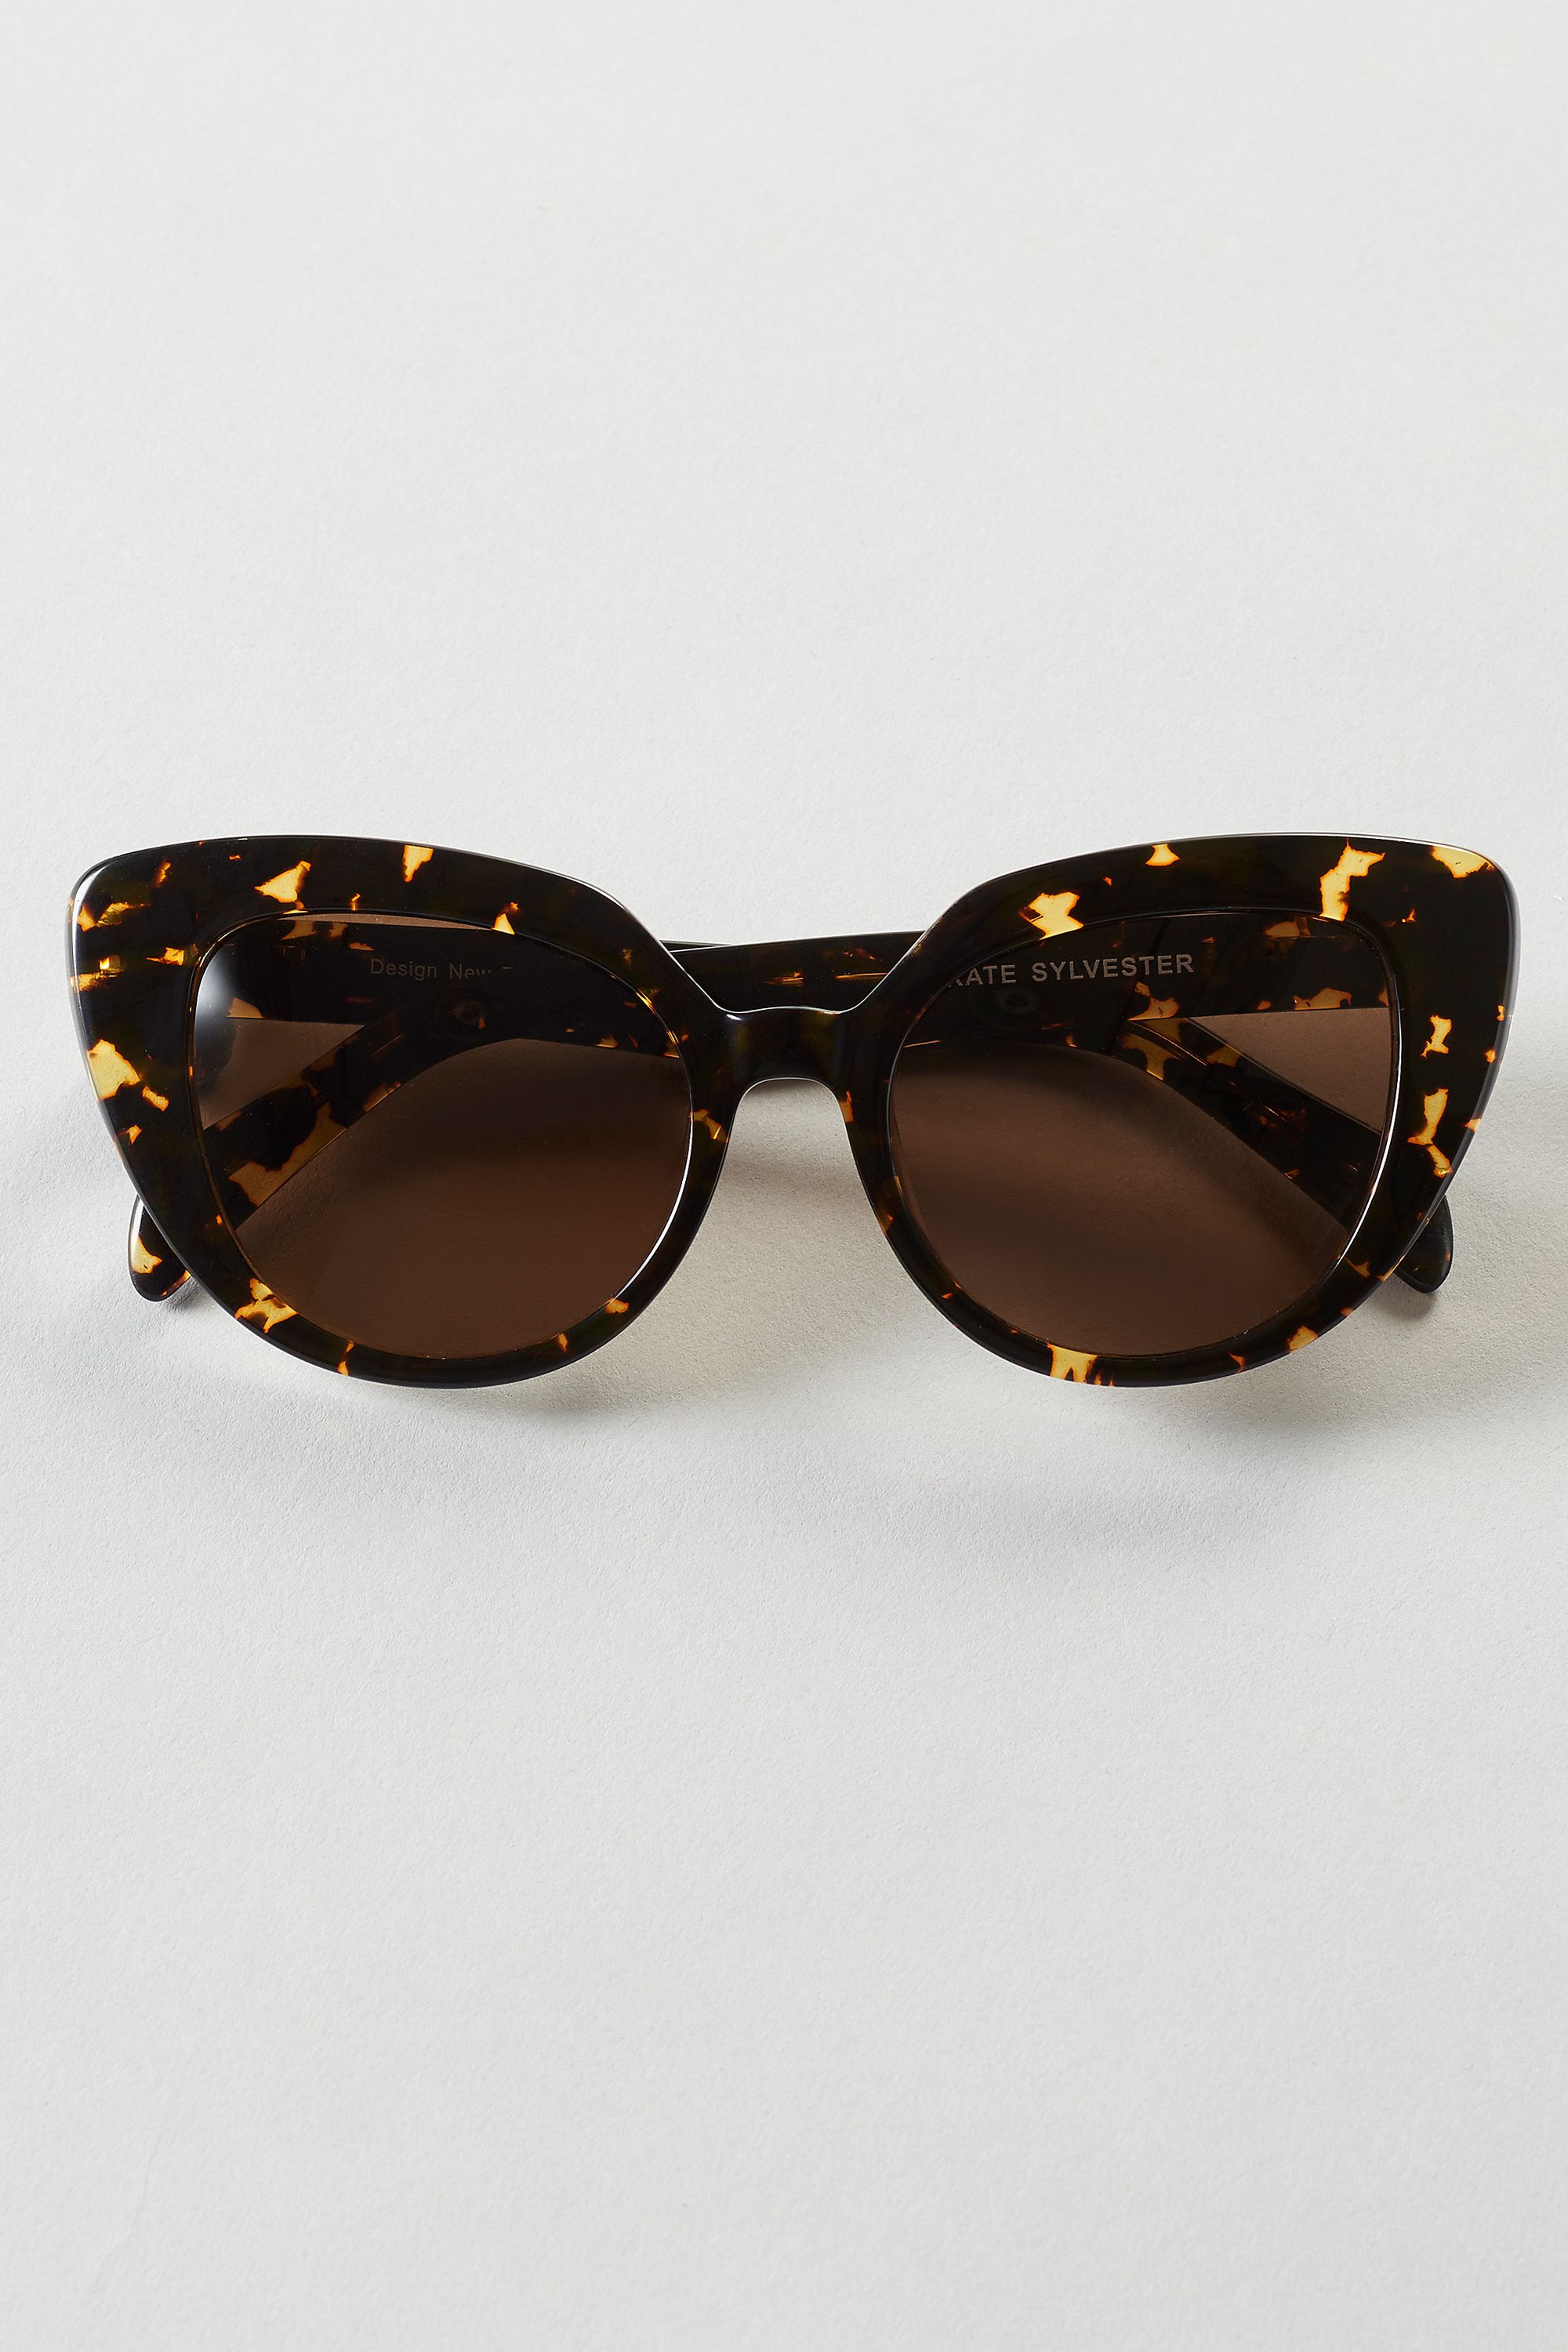 Holly Sunglasses, Kate Sylvester, $349